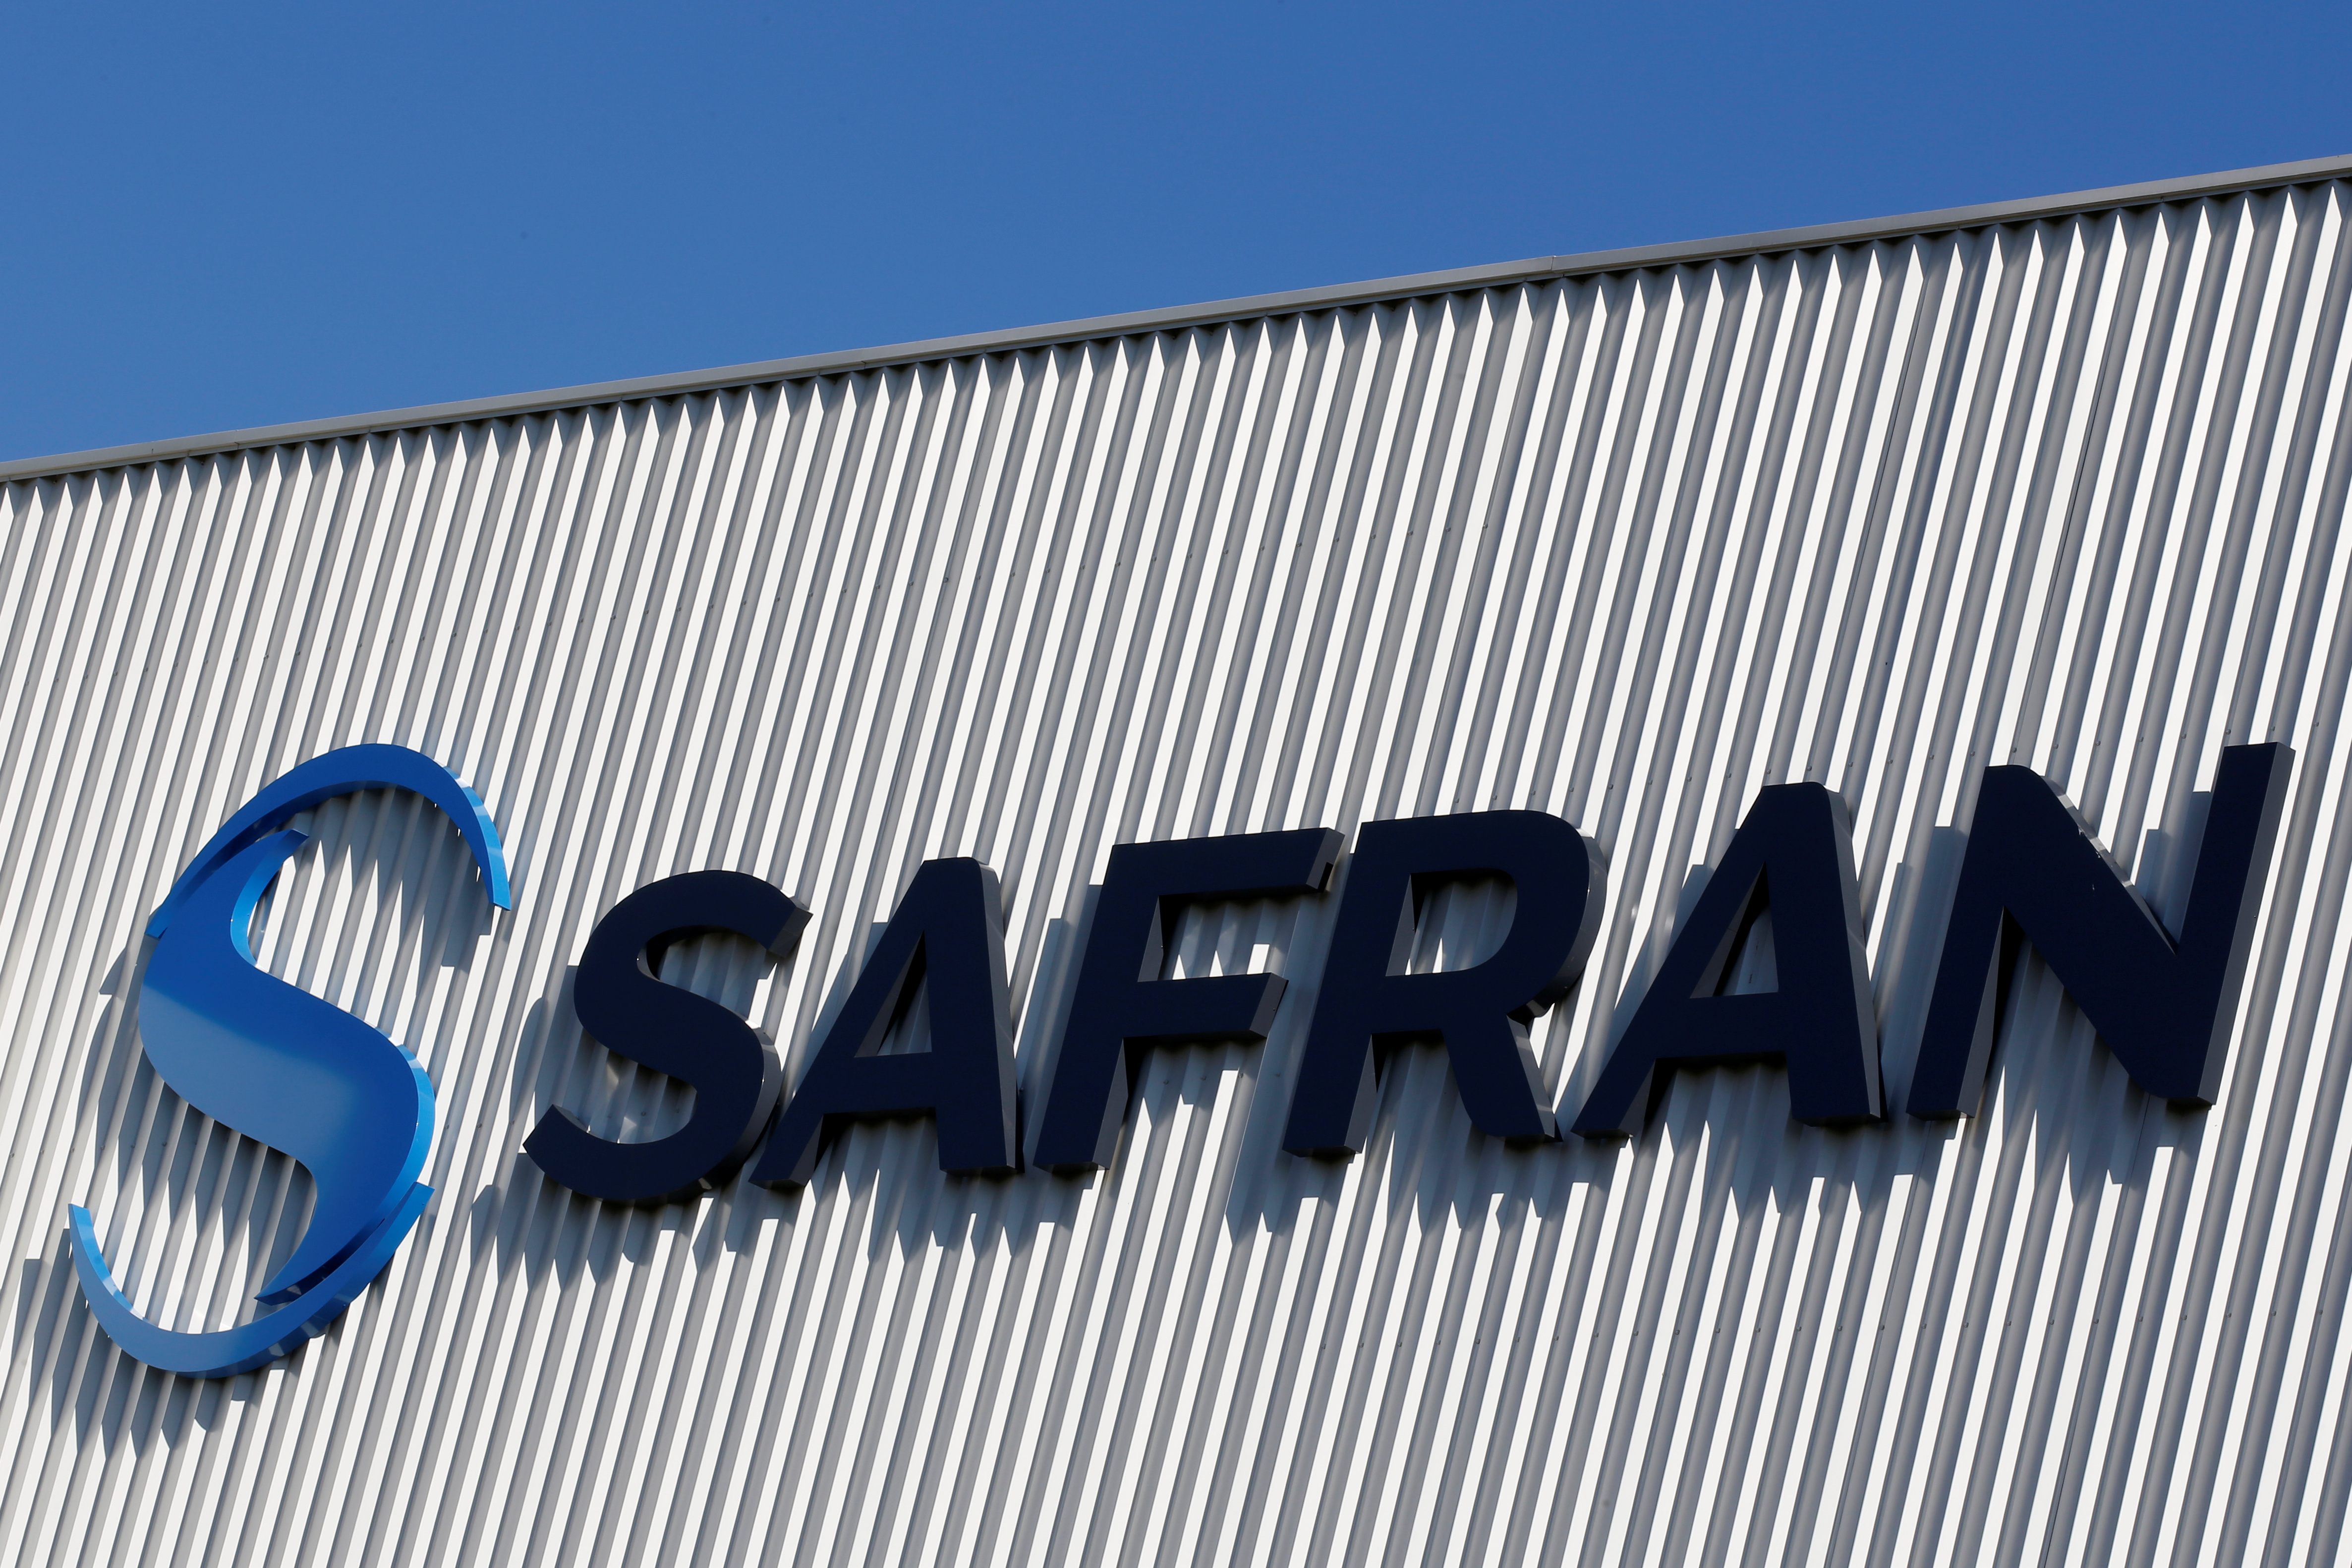 The Safran company logo is pictured at the company's logistic area in Colomiers near Toulouse